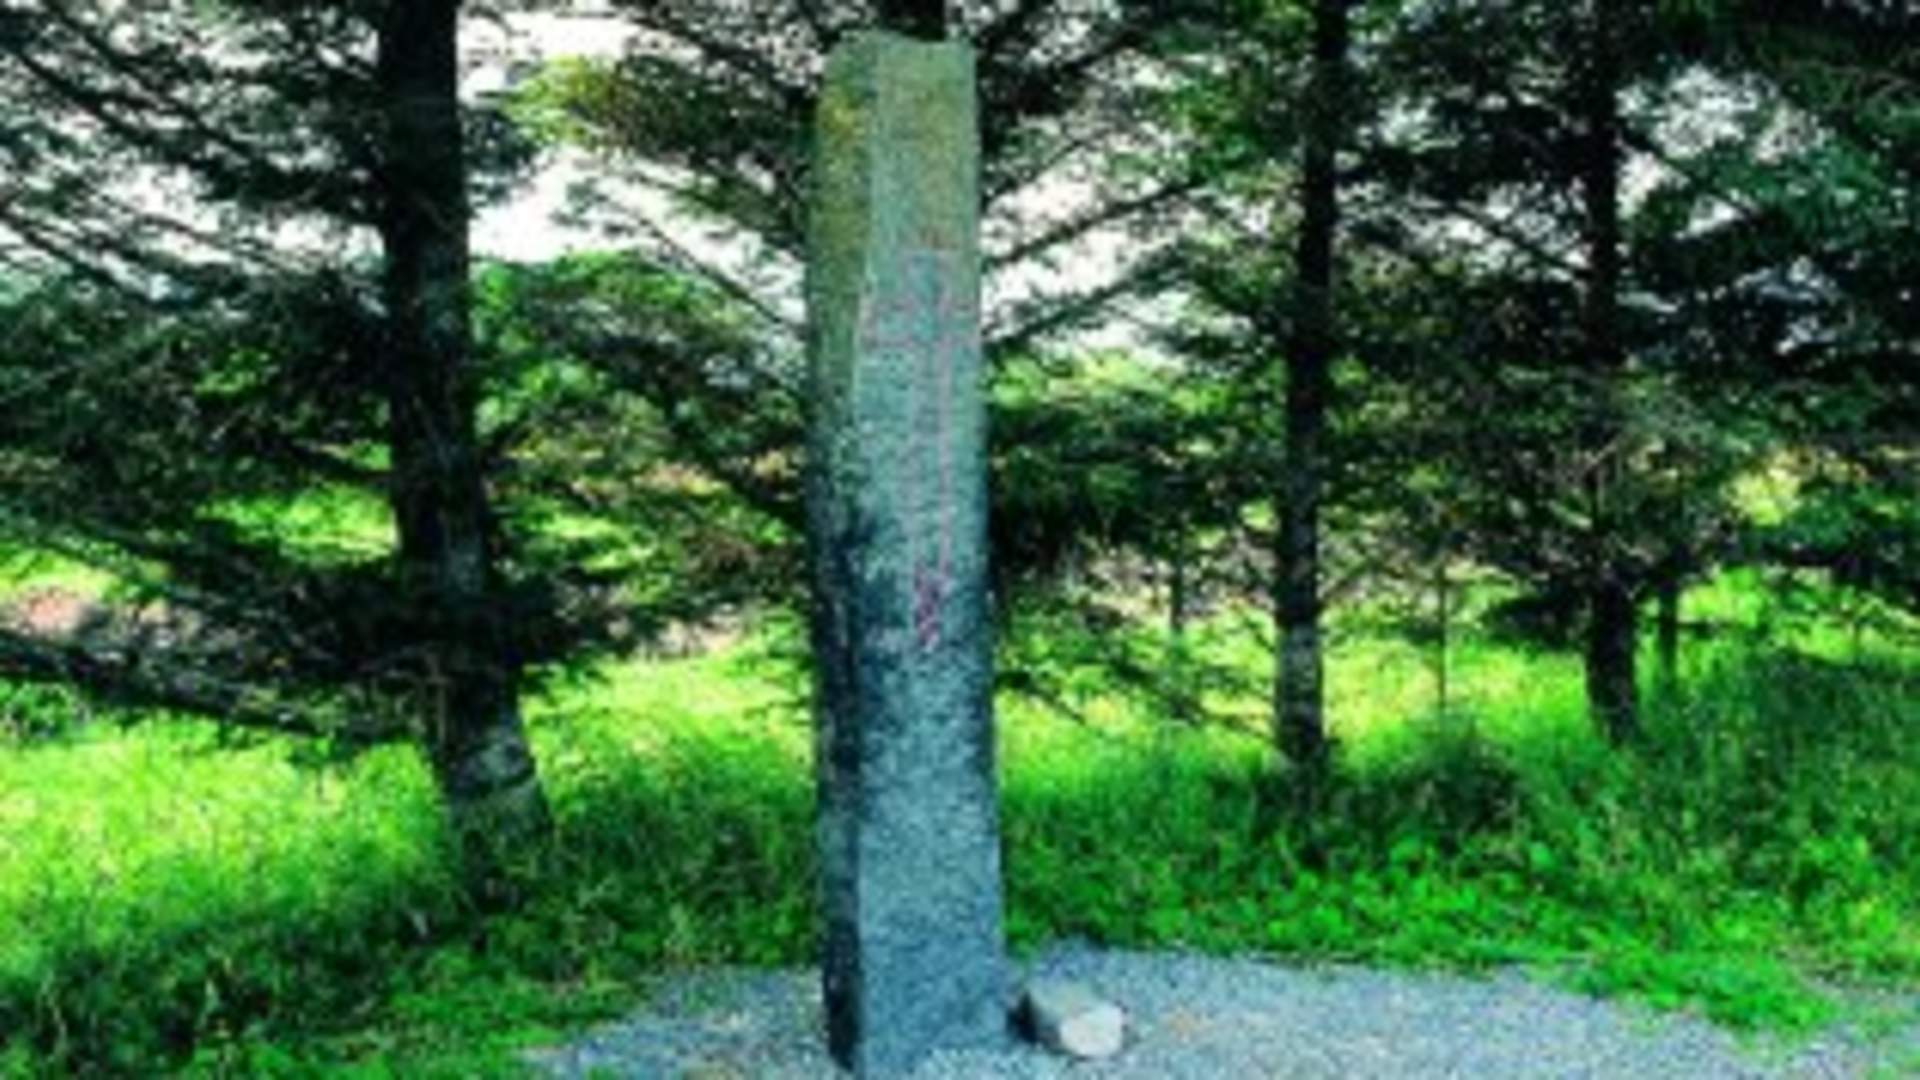 Kulisteinen - a stone with a runic inscription